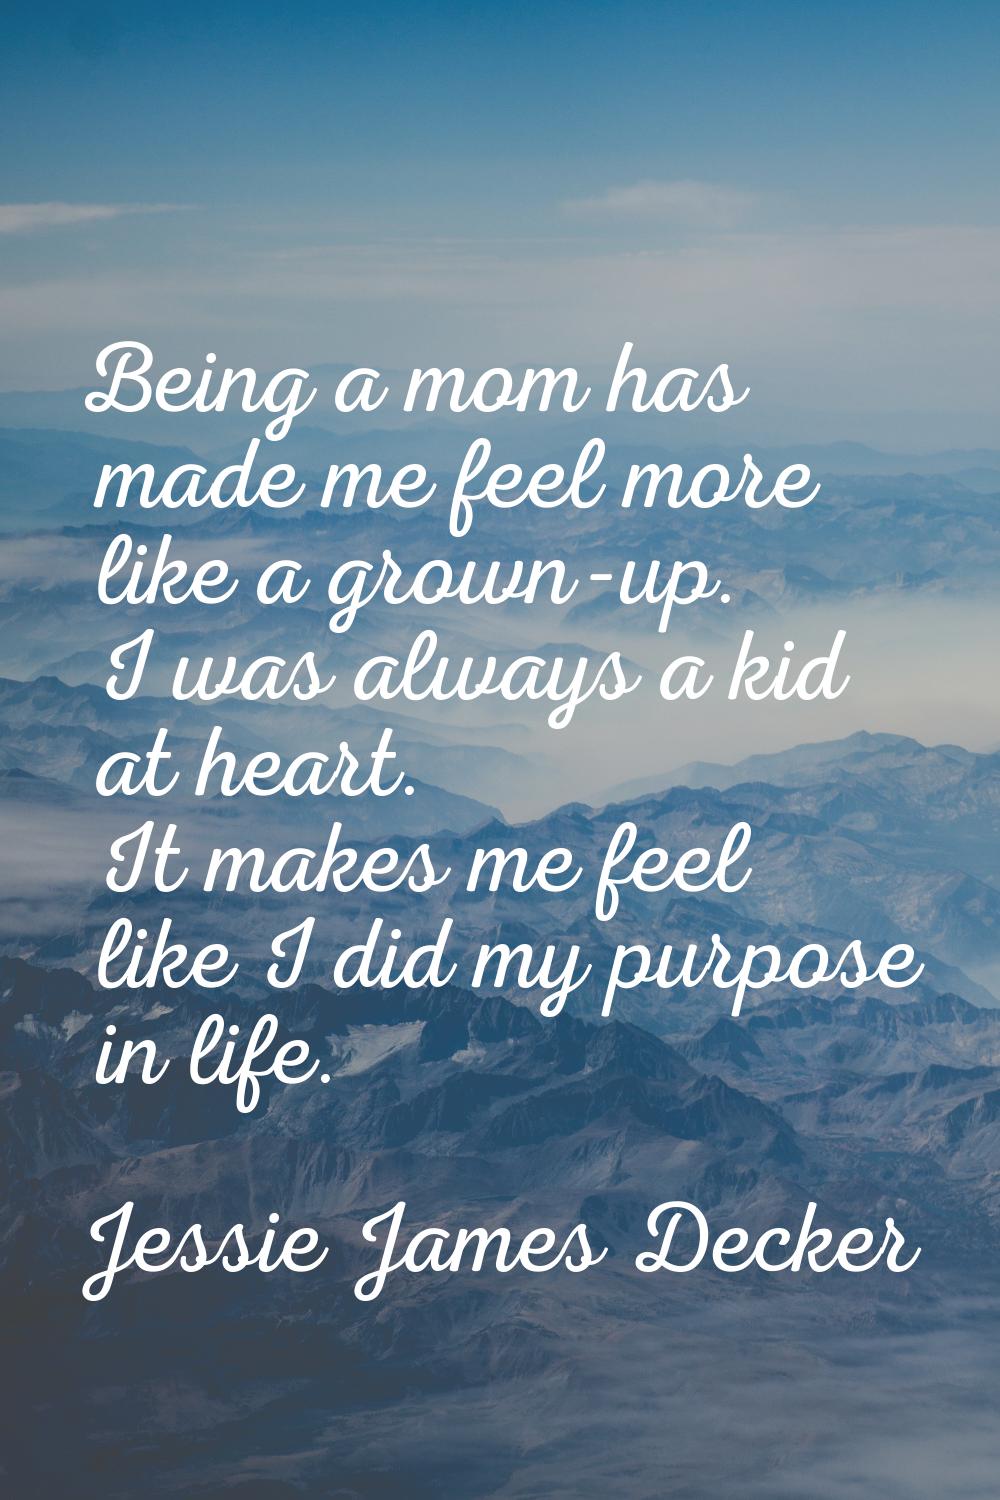 Being a mom has made me feel more like a grown-up. I was always a kid at heart. It makes me feel li